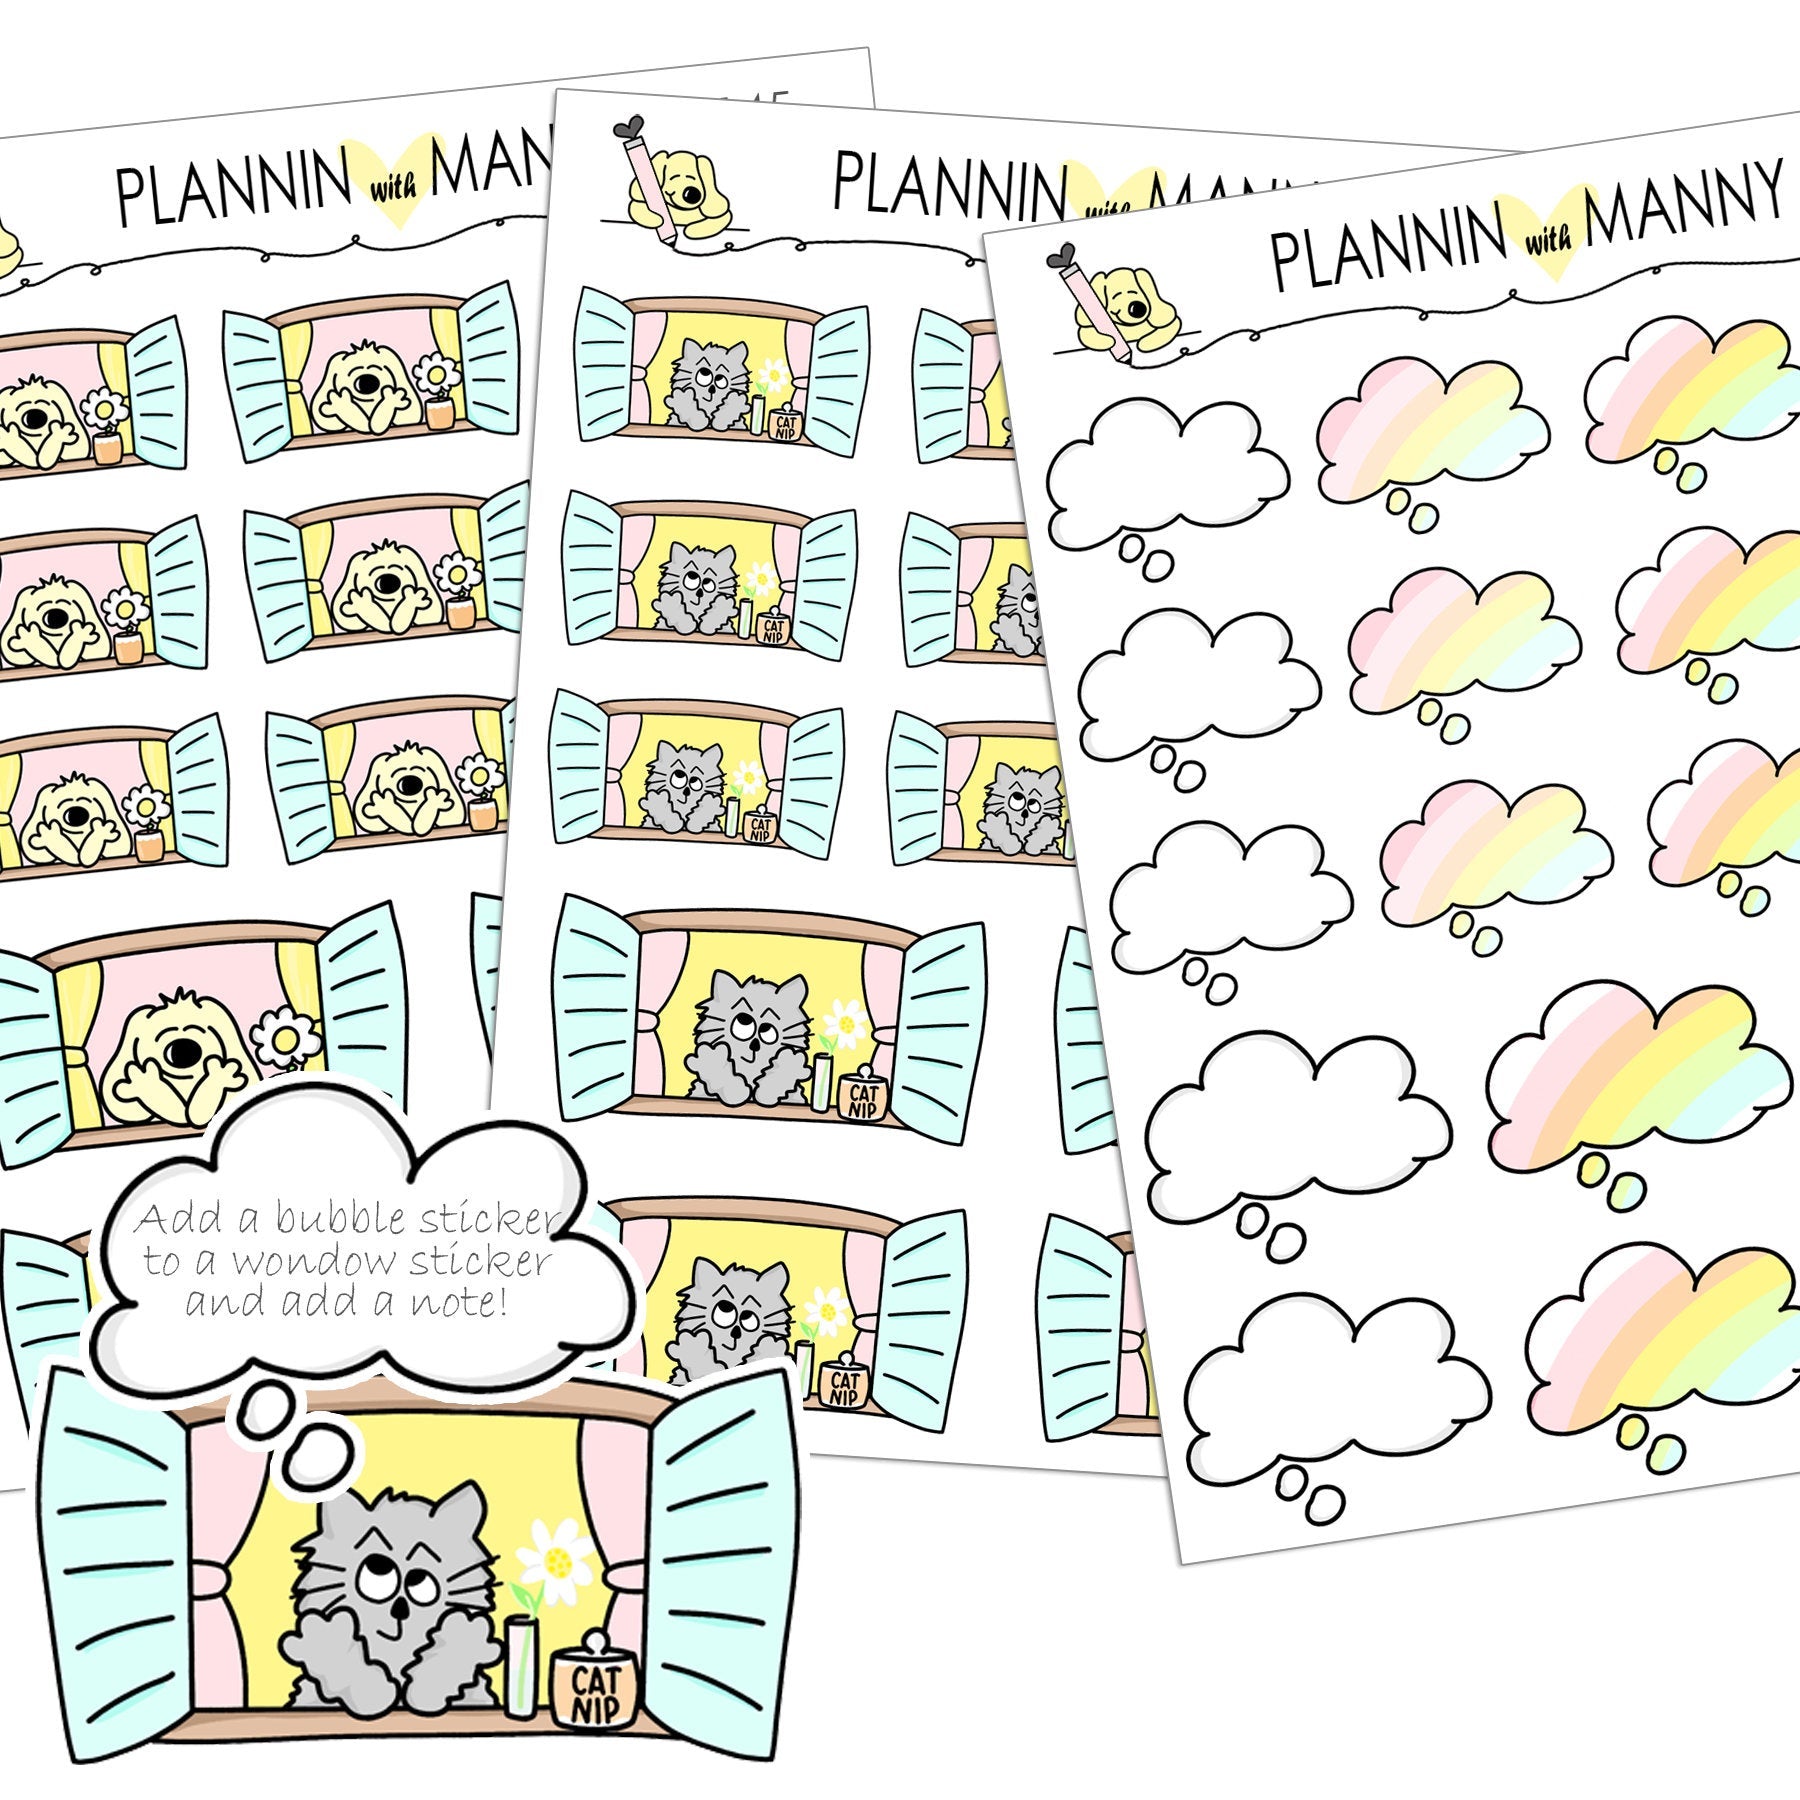 1145-7,  DAYDREAMING Planner Stickers